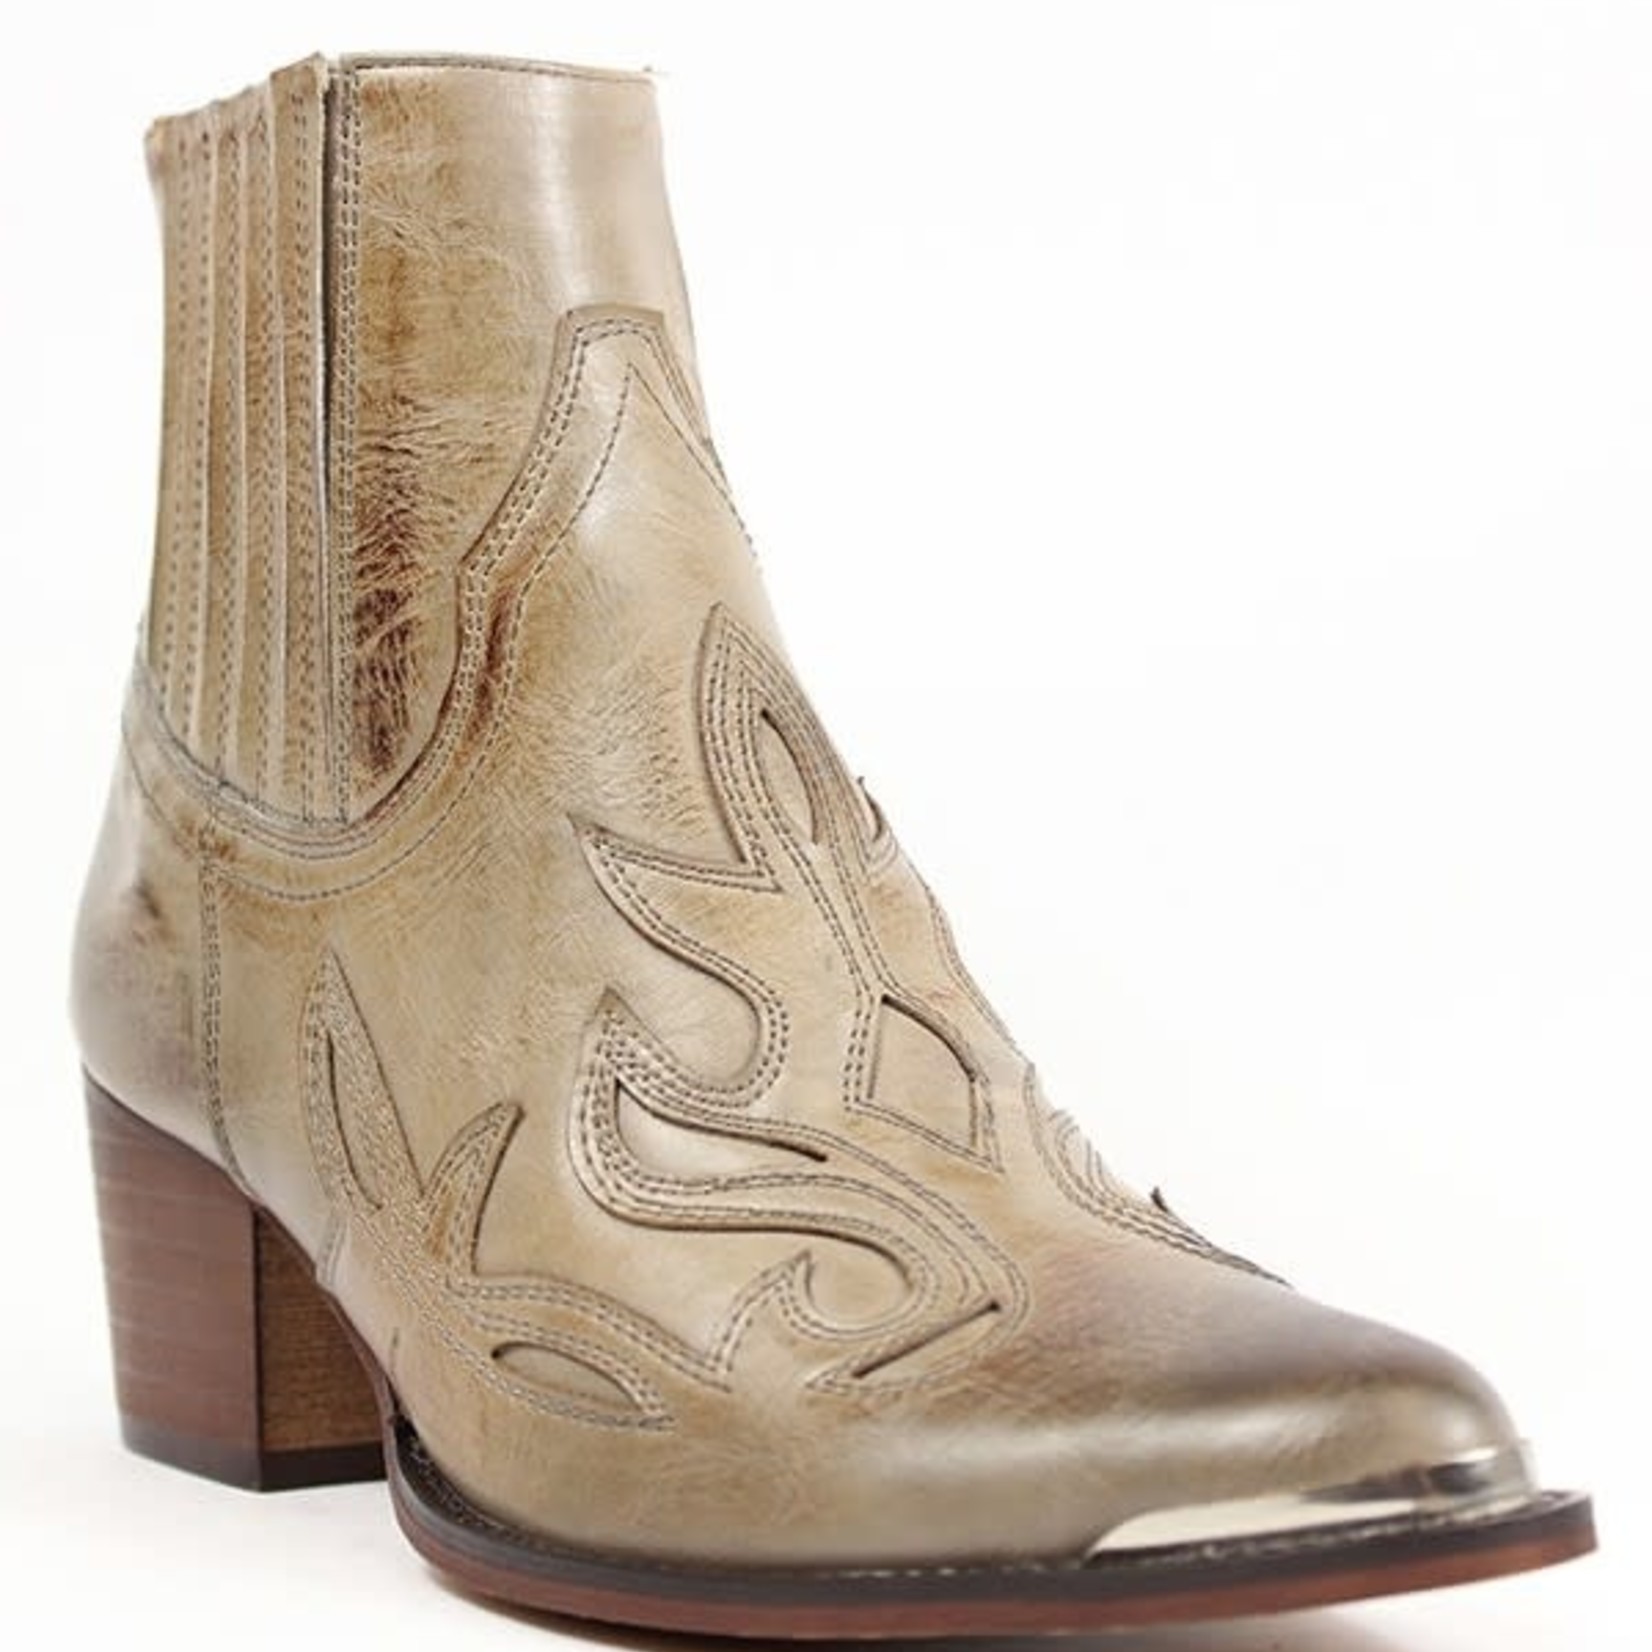 A Rider Girl Mary Western Ankle Booties